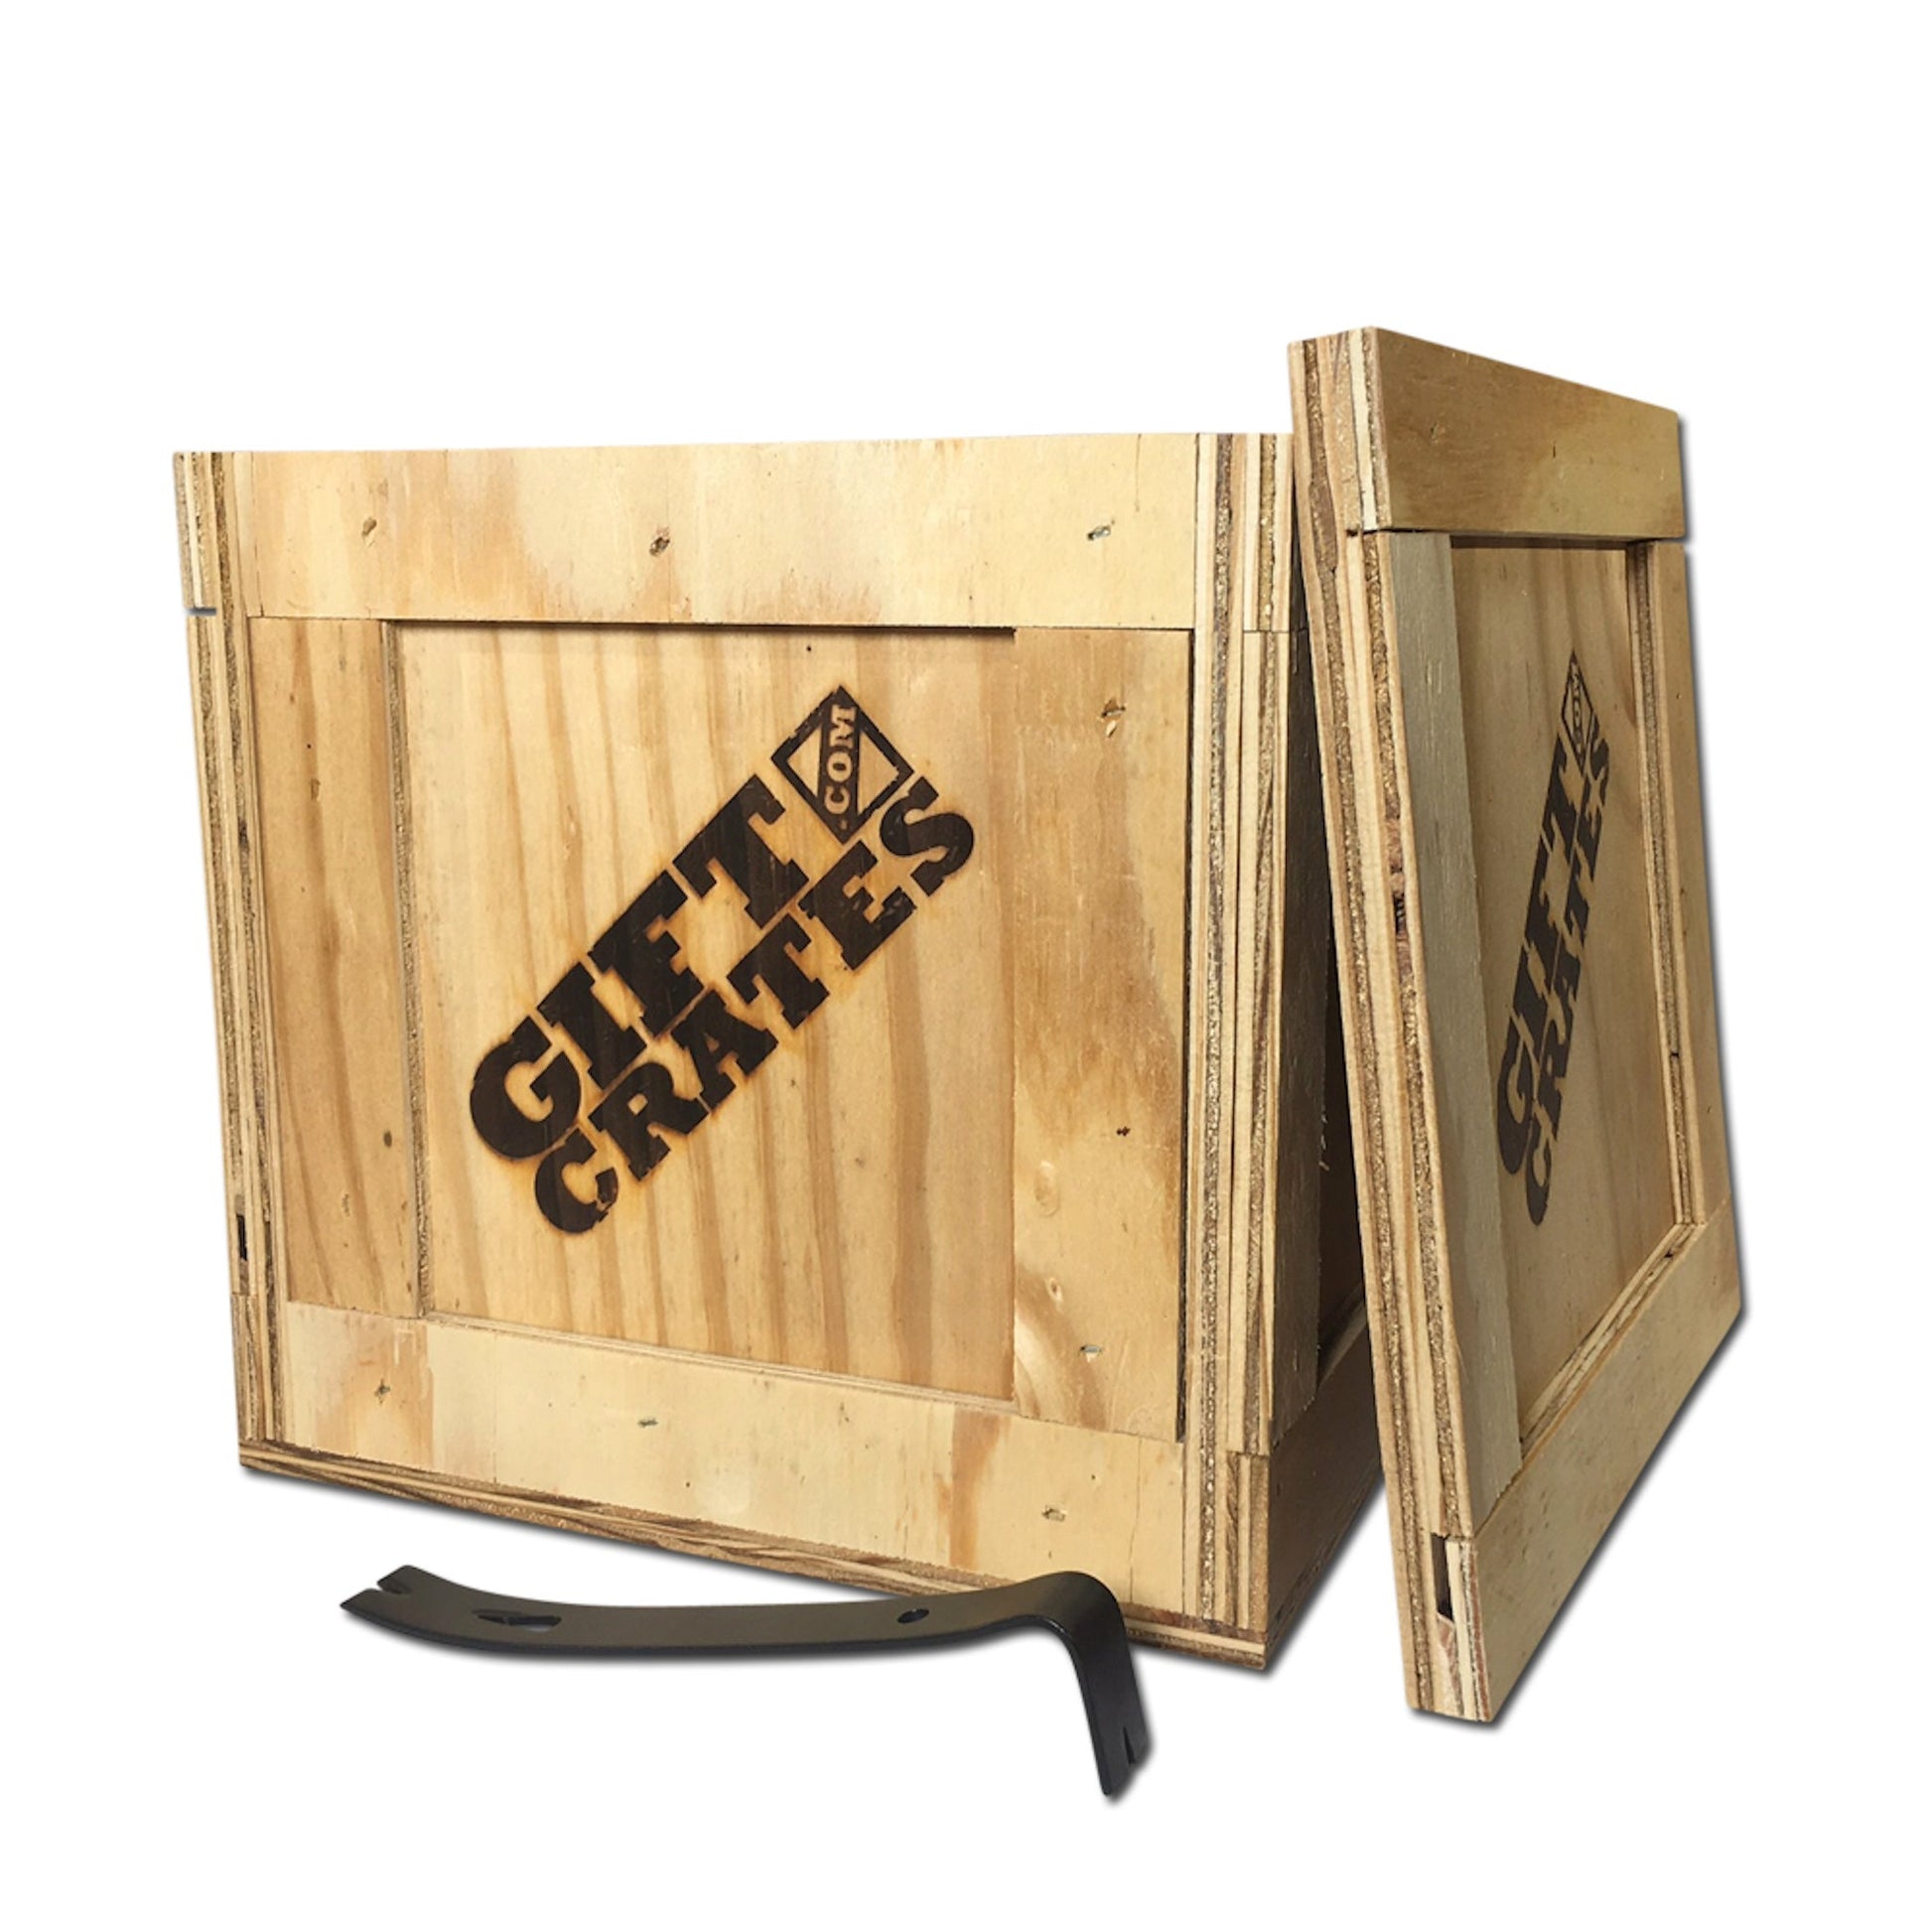 Going Nuts Crate - Gift Crates